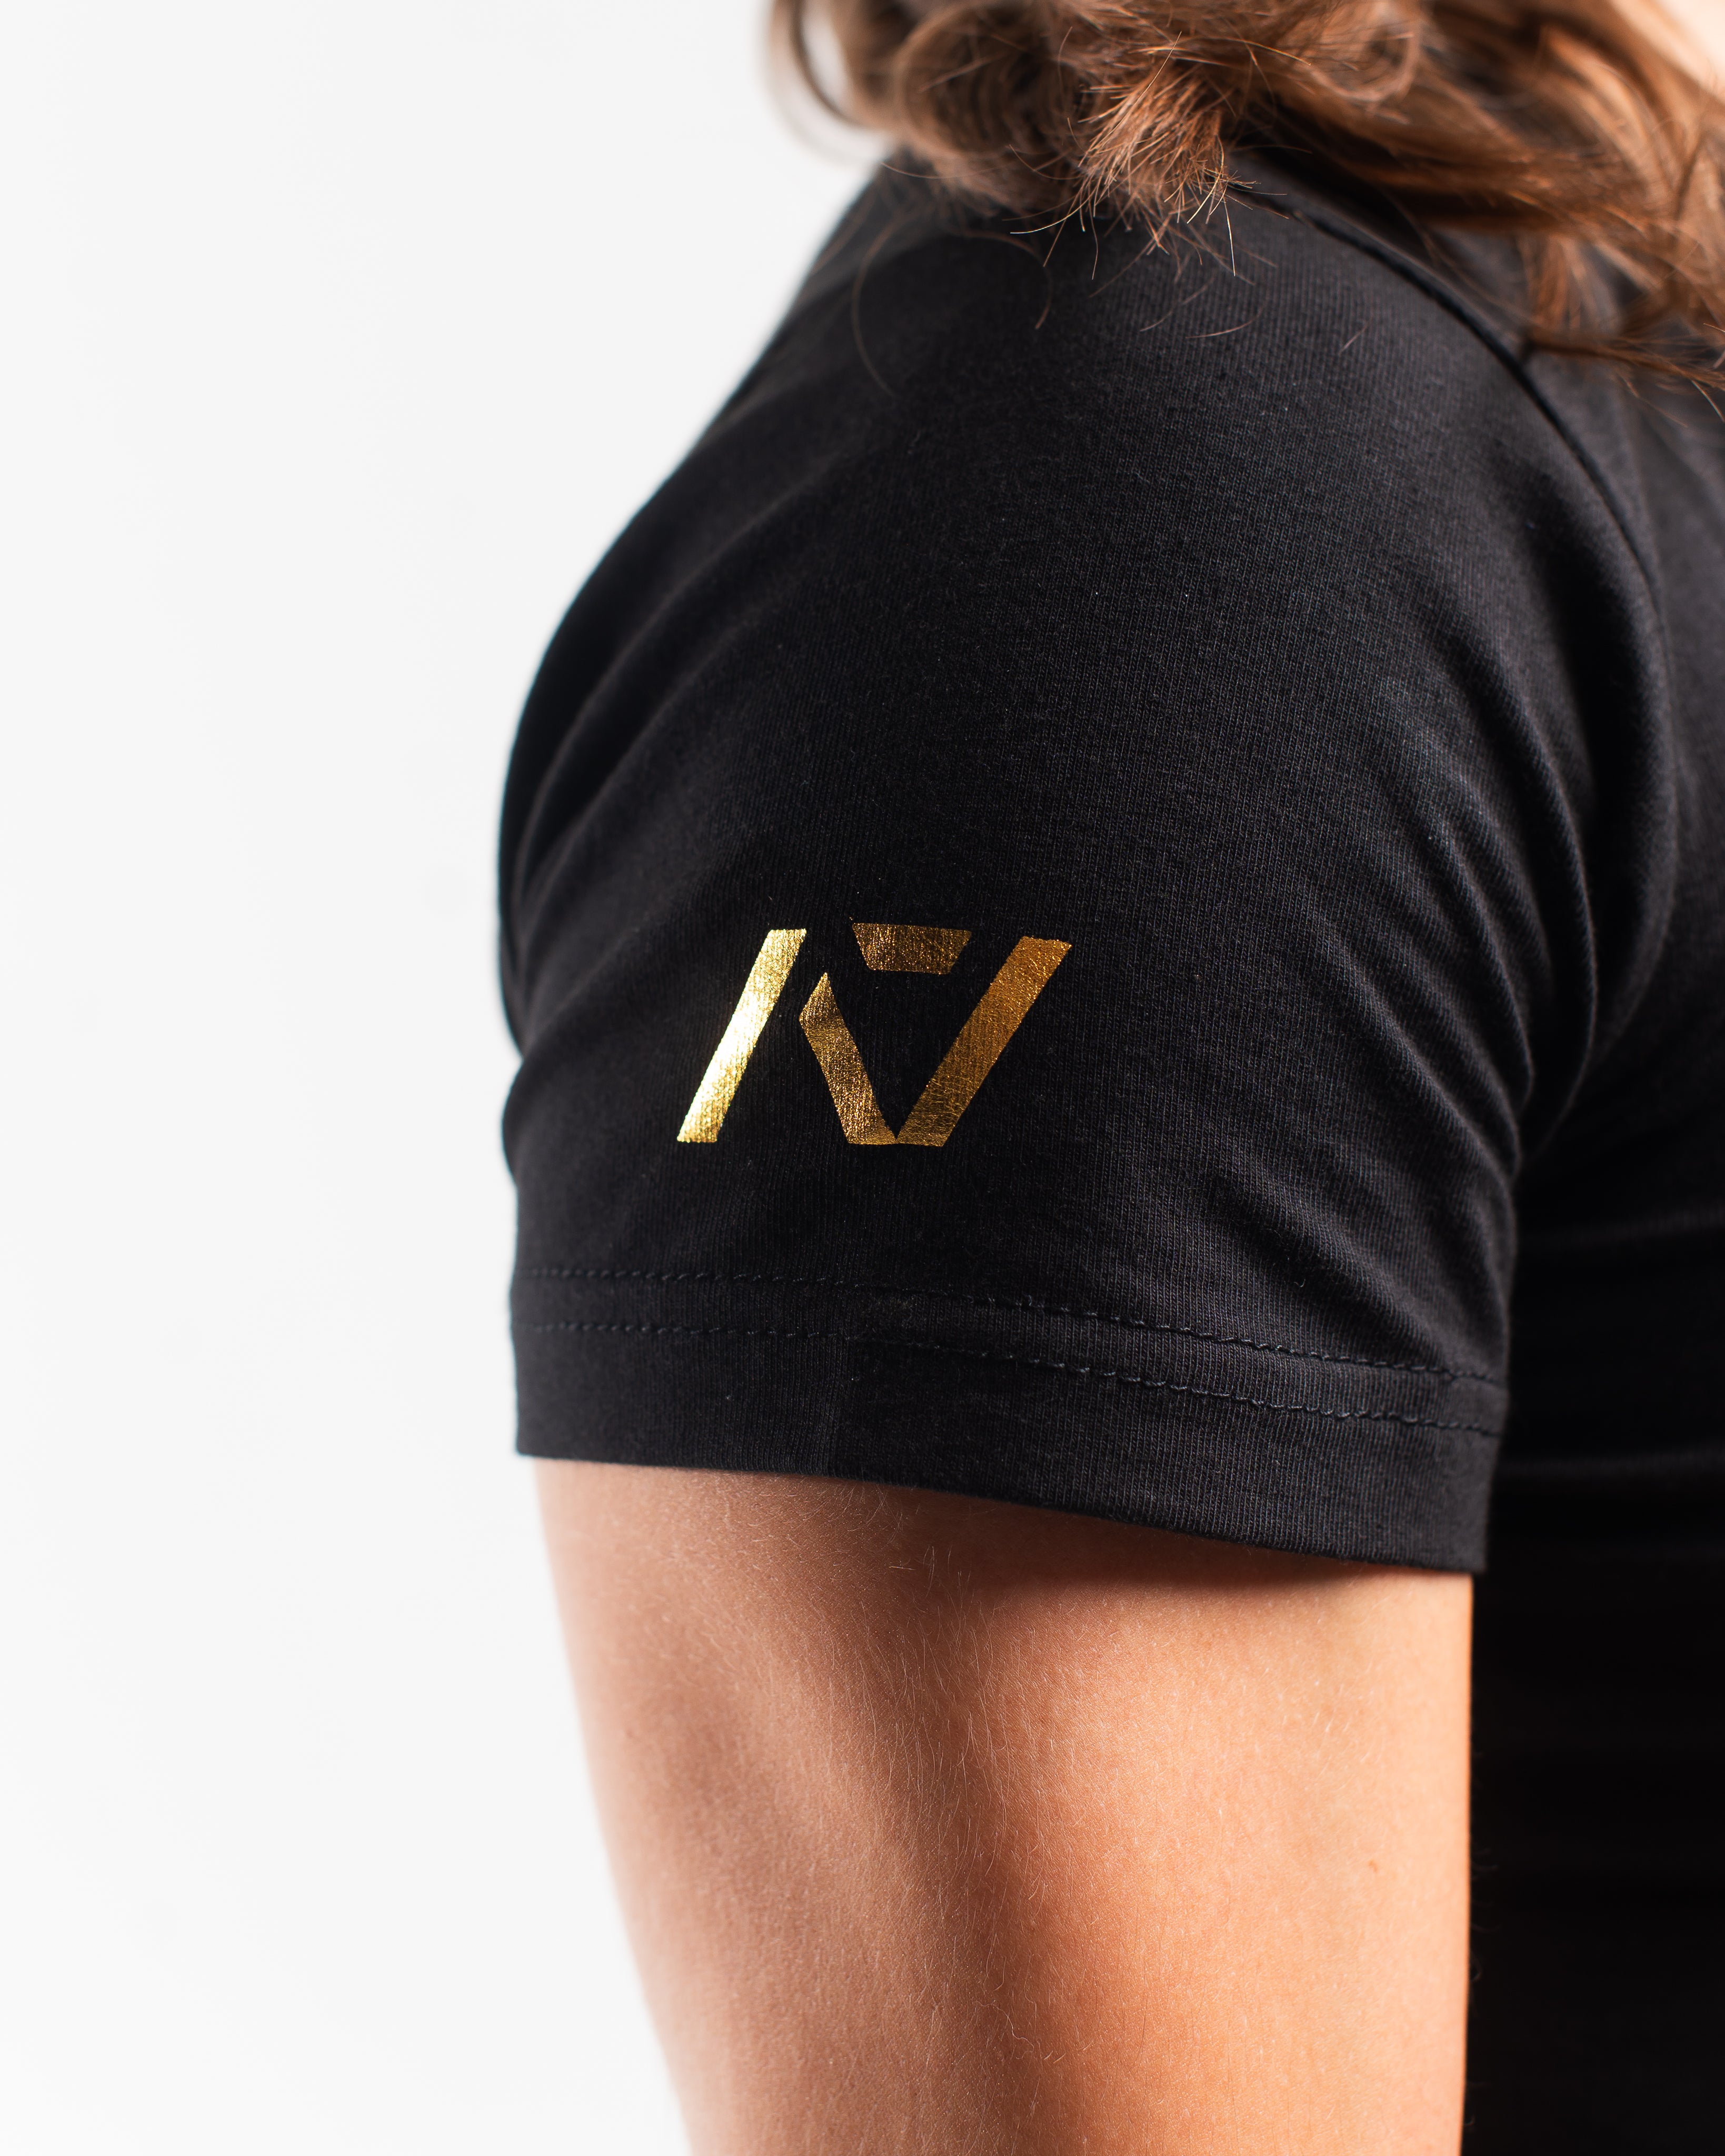 DG23 Gold Standard is our new meet shirt design highlighting Demand Greatness with a double outline font to showcase your impact on the platform. The DG23 Meet Shirt is IPF Approved. Shop the full A7 Powerlifting IPF Approved Equipment collection. The IPF Approved Kit includes Powerlifting Singlet, A7 Meet Shirt, A7 Zebra Wrist Wraps, A7 Deadlift Socks, Hourglass Knee Sleeves (Stiff Knee Sleeves and Rigor Mortis Knee Sleeves). All A7 Powerlifting Equipment shipping to UK, Norway, Switzerland and Iceland.